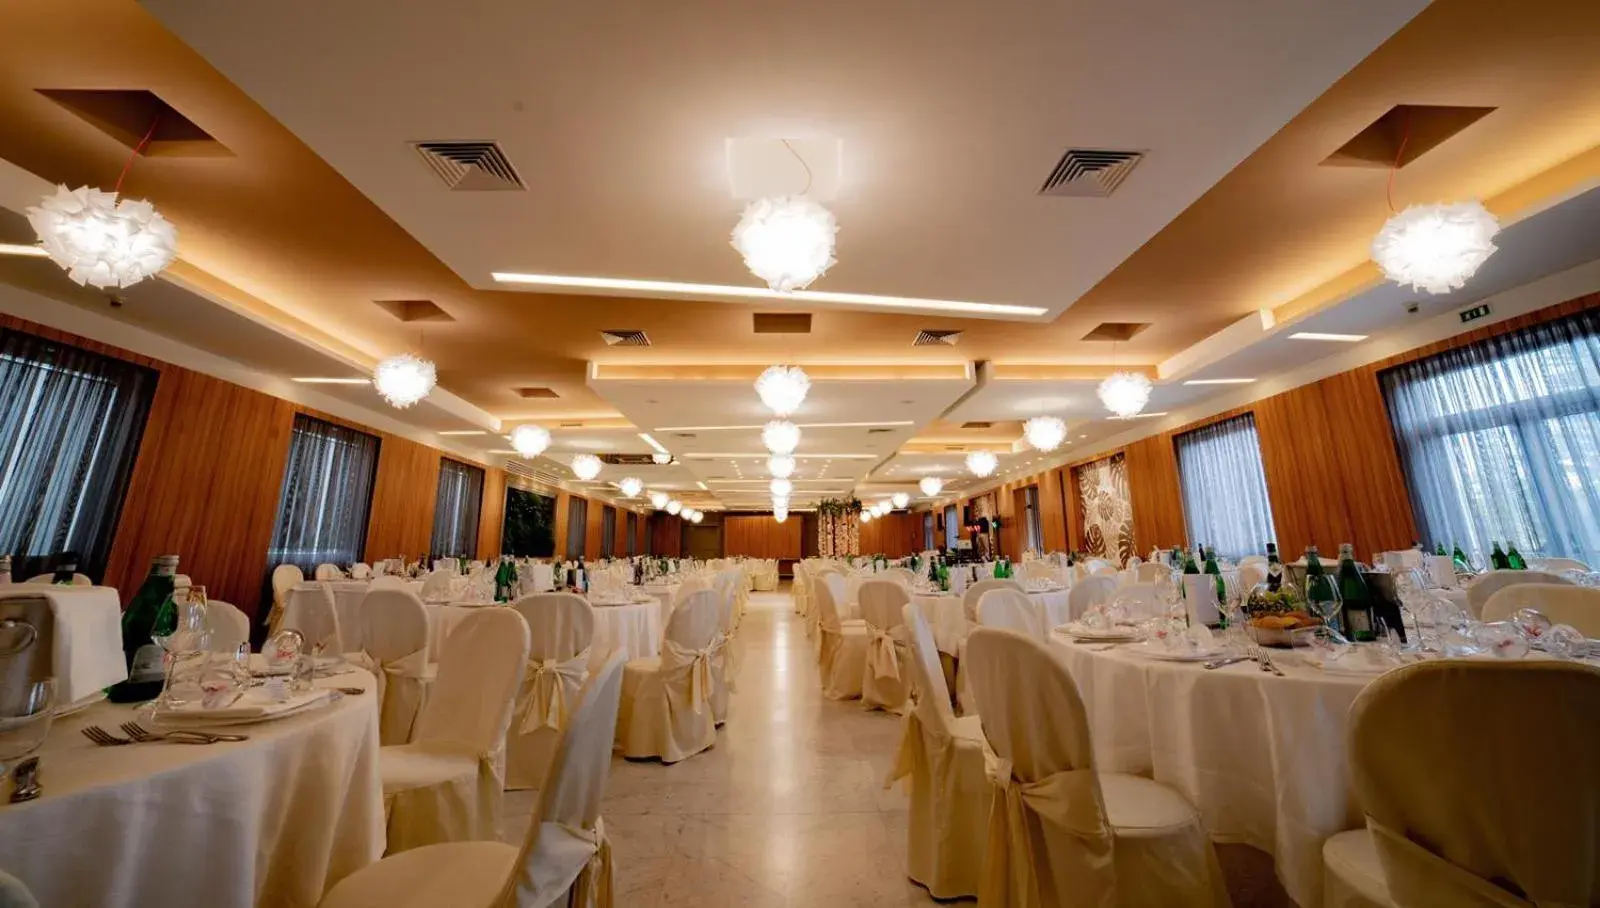 Meeting/conference room, Banquet Facilities in Hotel Altamira